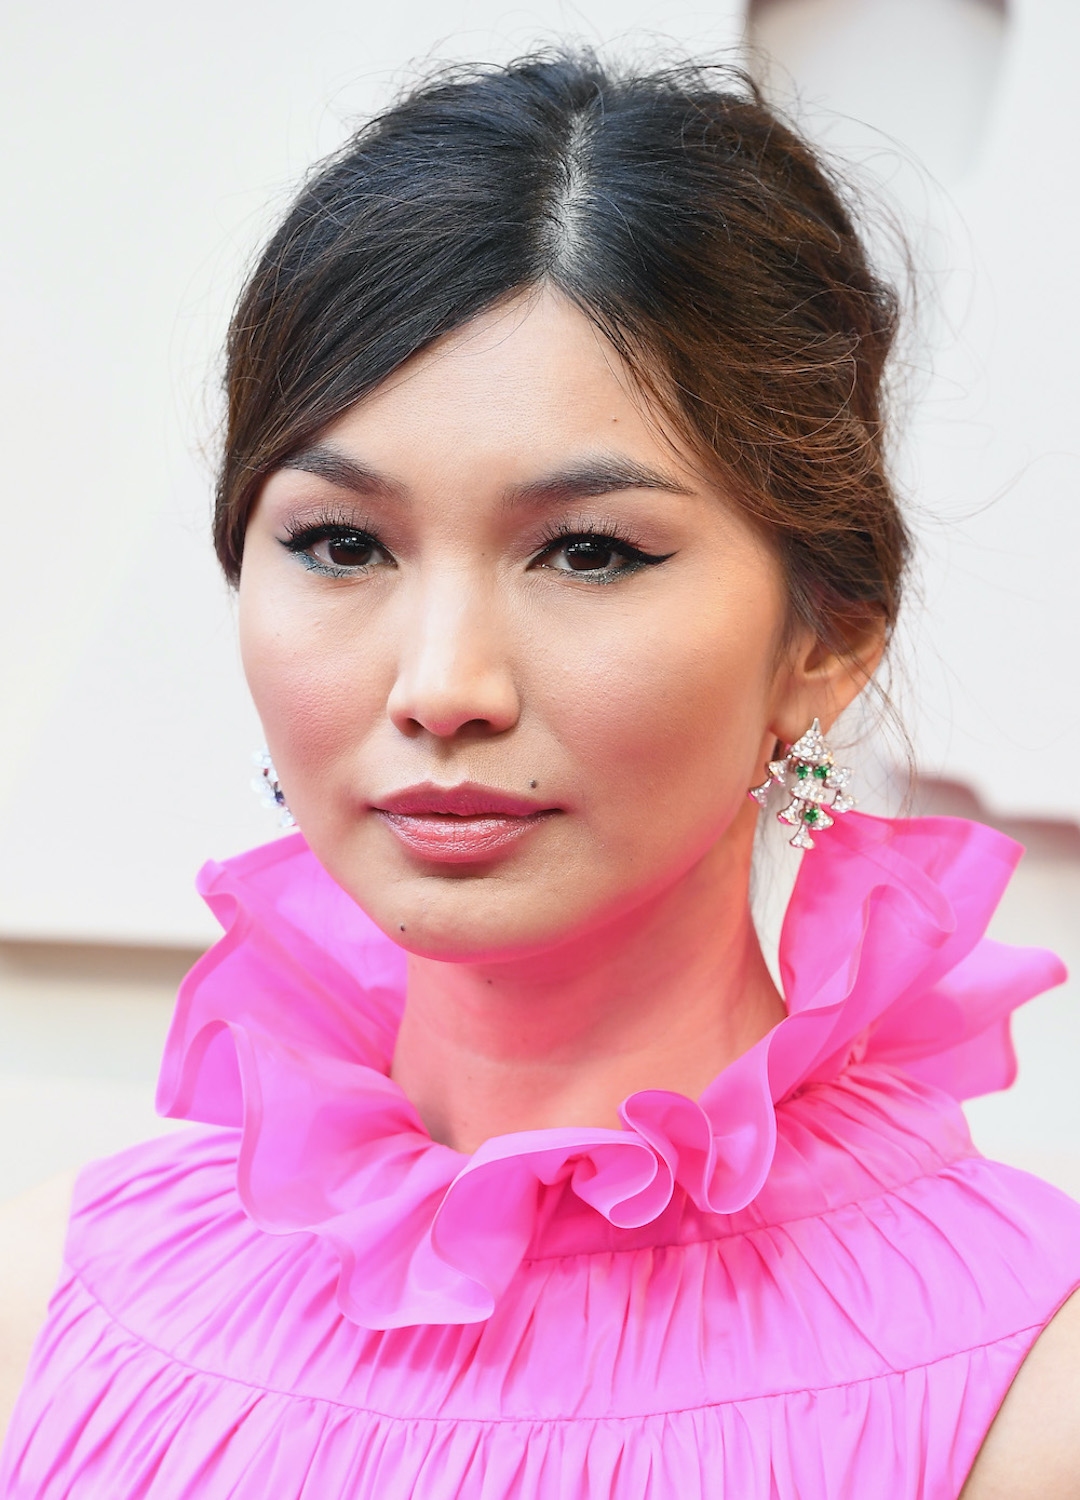 Gemma Chan attends the 91st Annual Academy Awards at Hollywood and Highland on February 24, 2019 in Hollywood, California